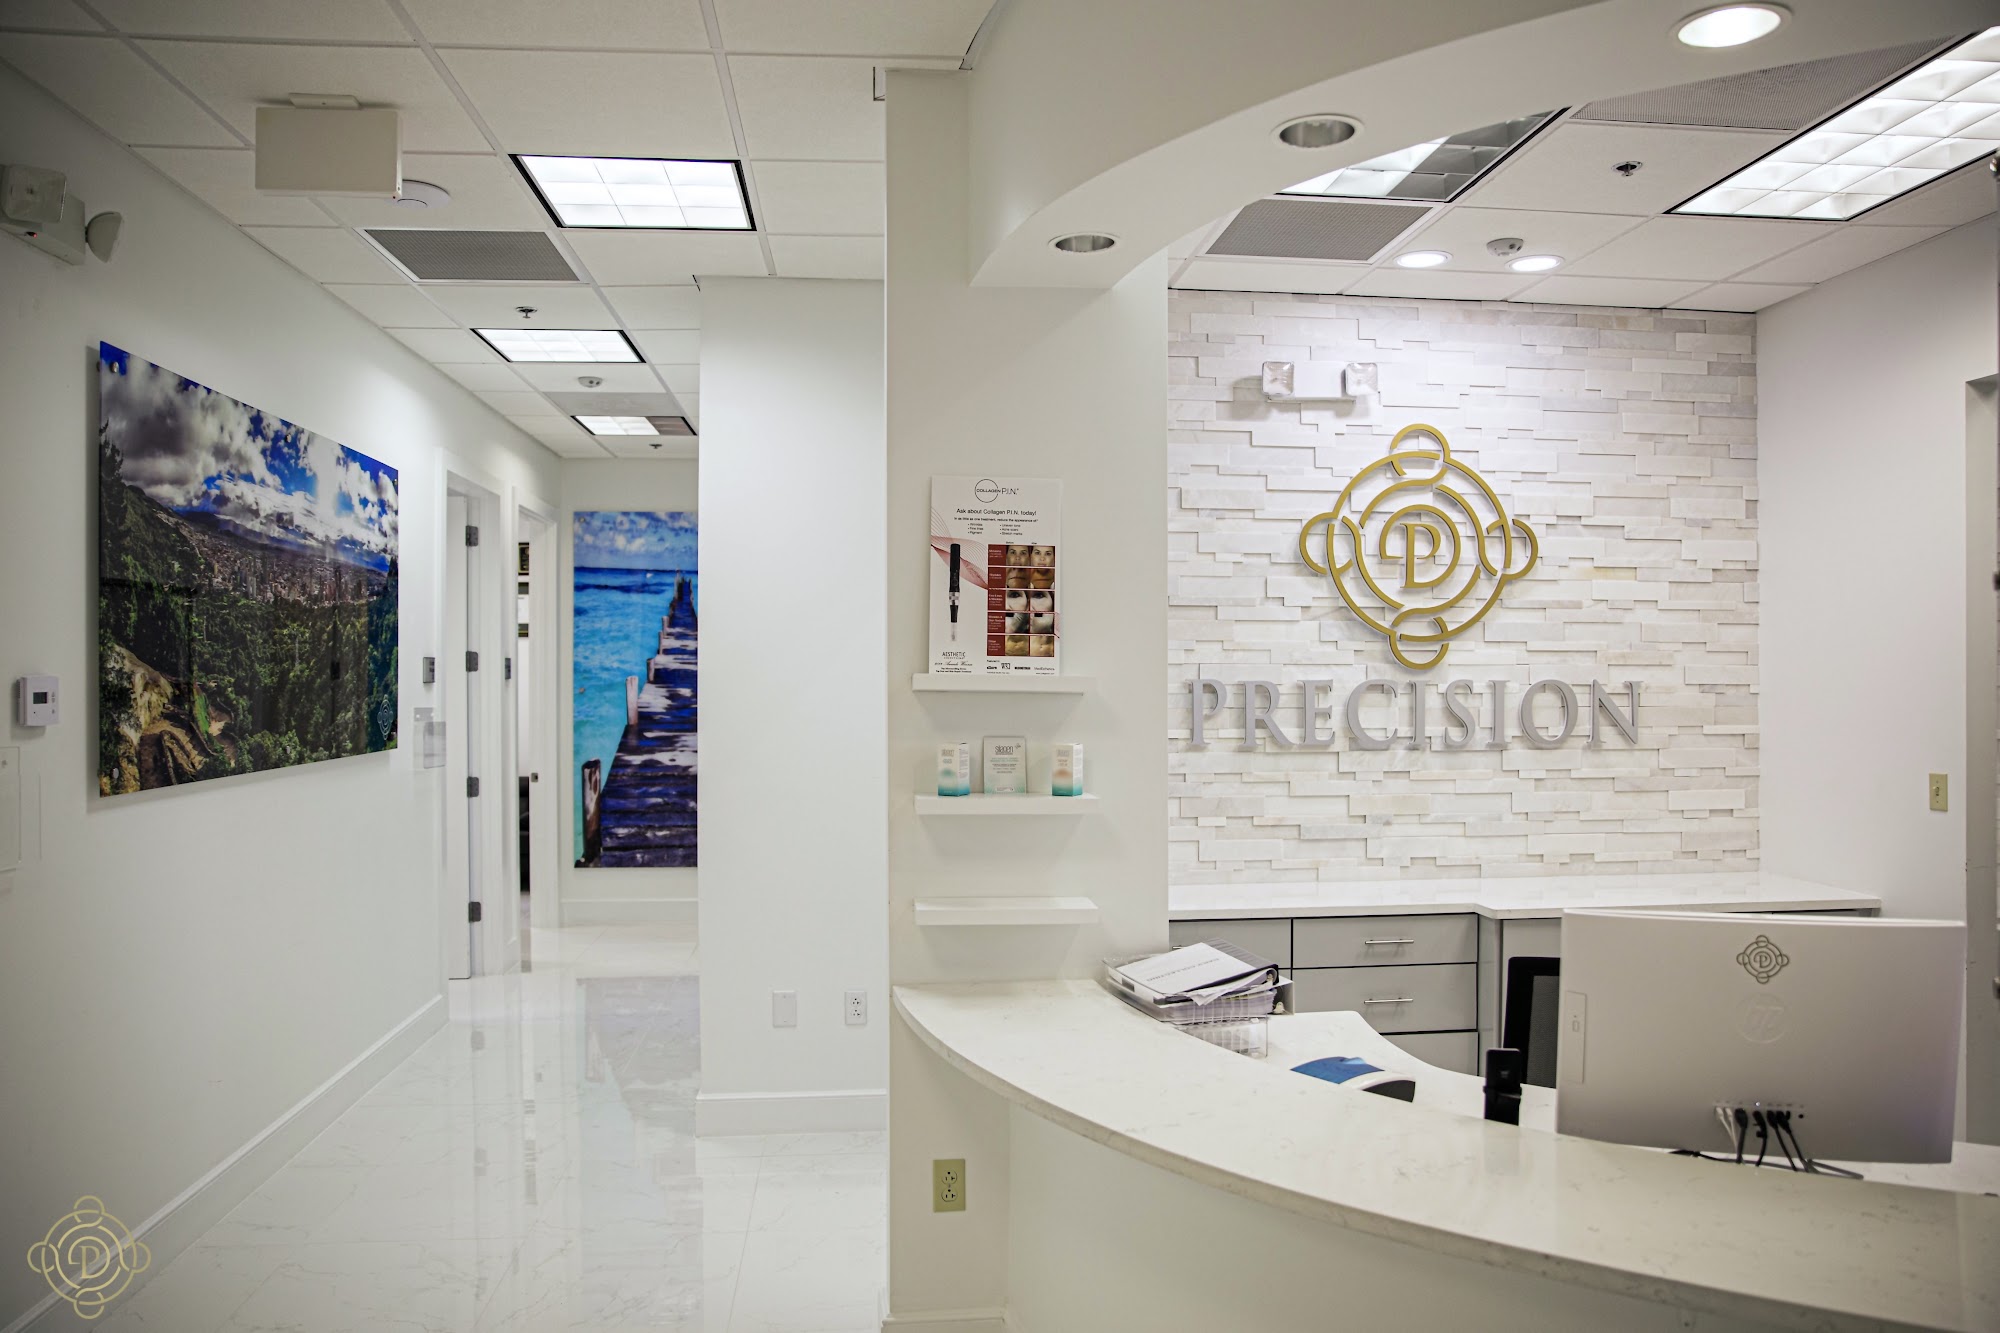 Precision Medical Specialists